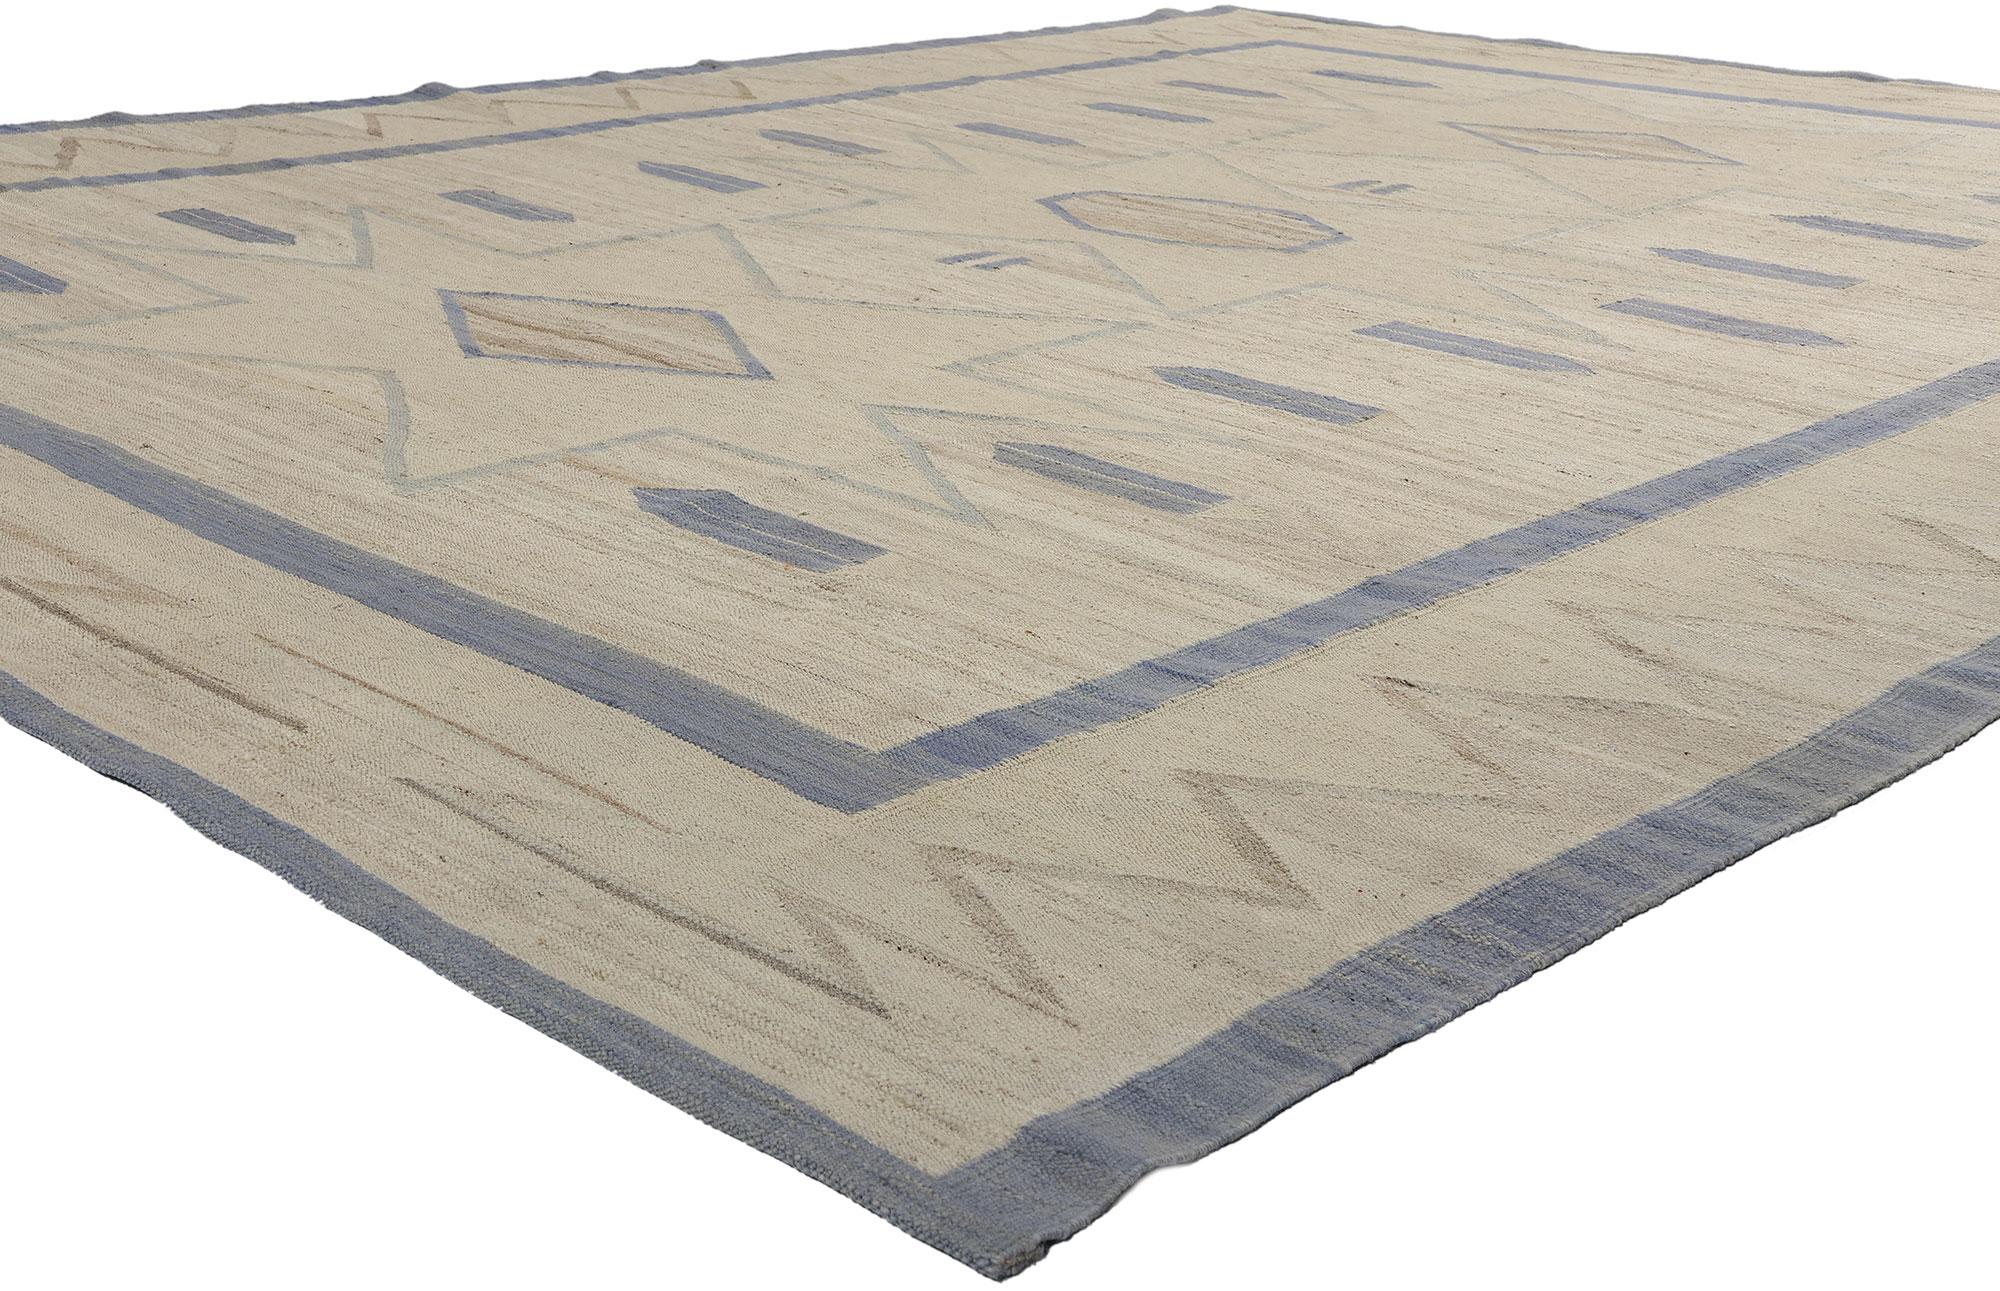 81097 Southwest Modern Desert Navajo-Style Rug, 08'11 x 11'05. Enter the captivating domain of this handwoven wool Southwest Modern Desert Chic Navajo-style rug, where each thread murmurs tales of tradition and modernity woven together seamlessly.